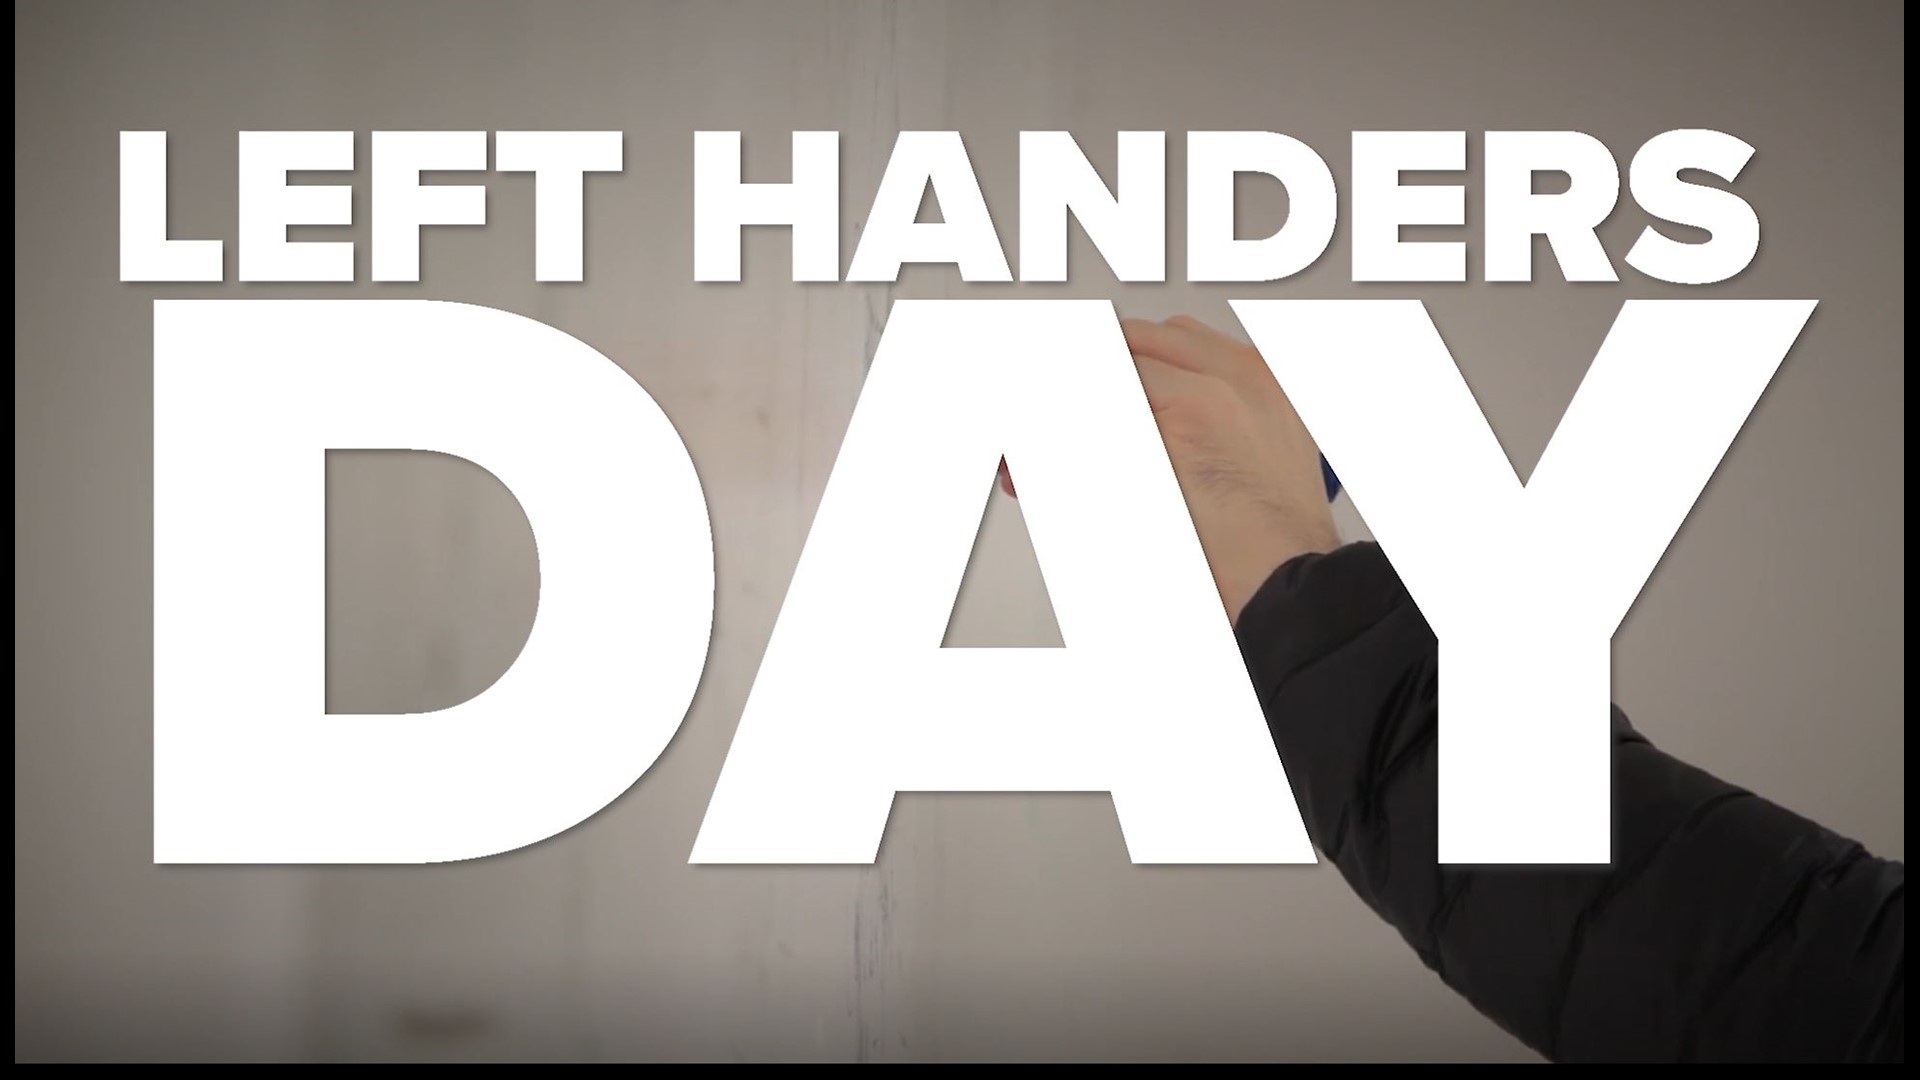 Here are some fun and interesting facts about lefties in honor of National Left Handers Day.